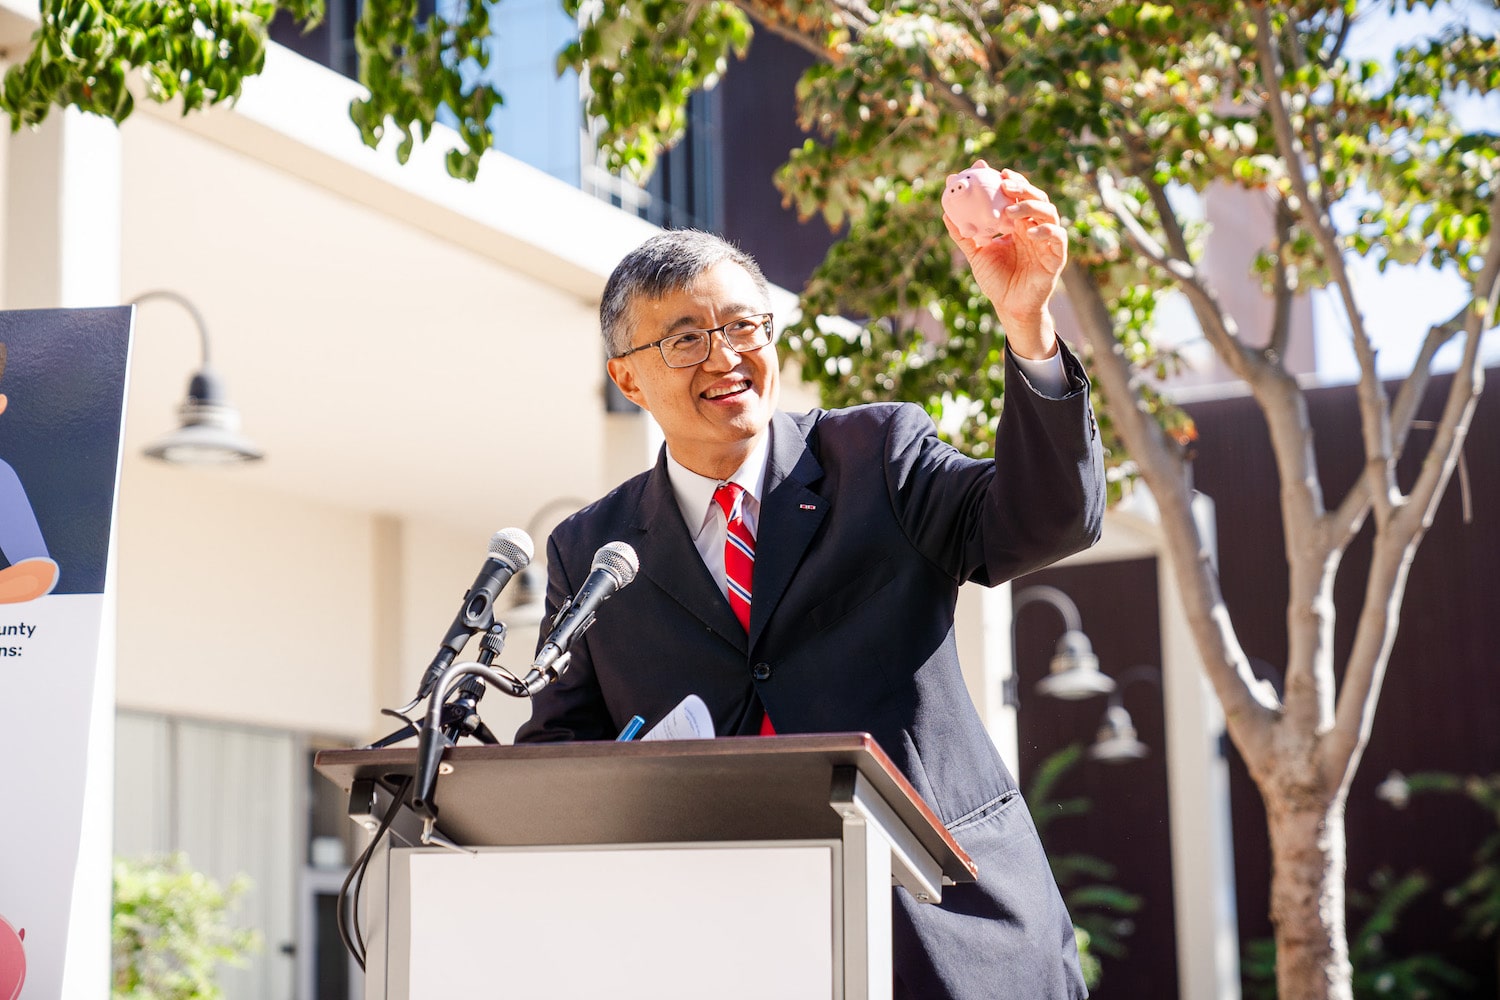 Photo of Supervisor Otto Lee speaking during MedAssist press conference, smiling, holding a stress-ball piggy bank.